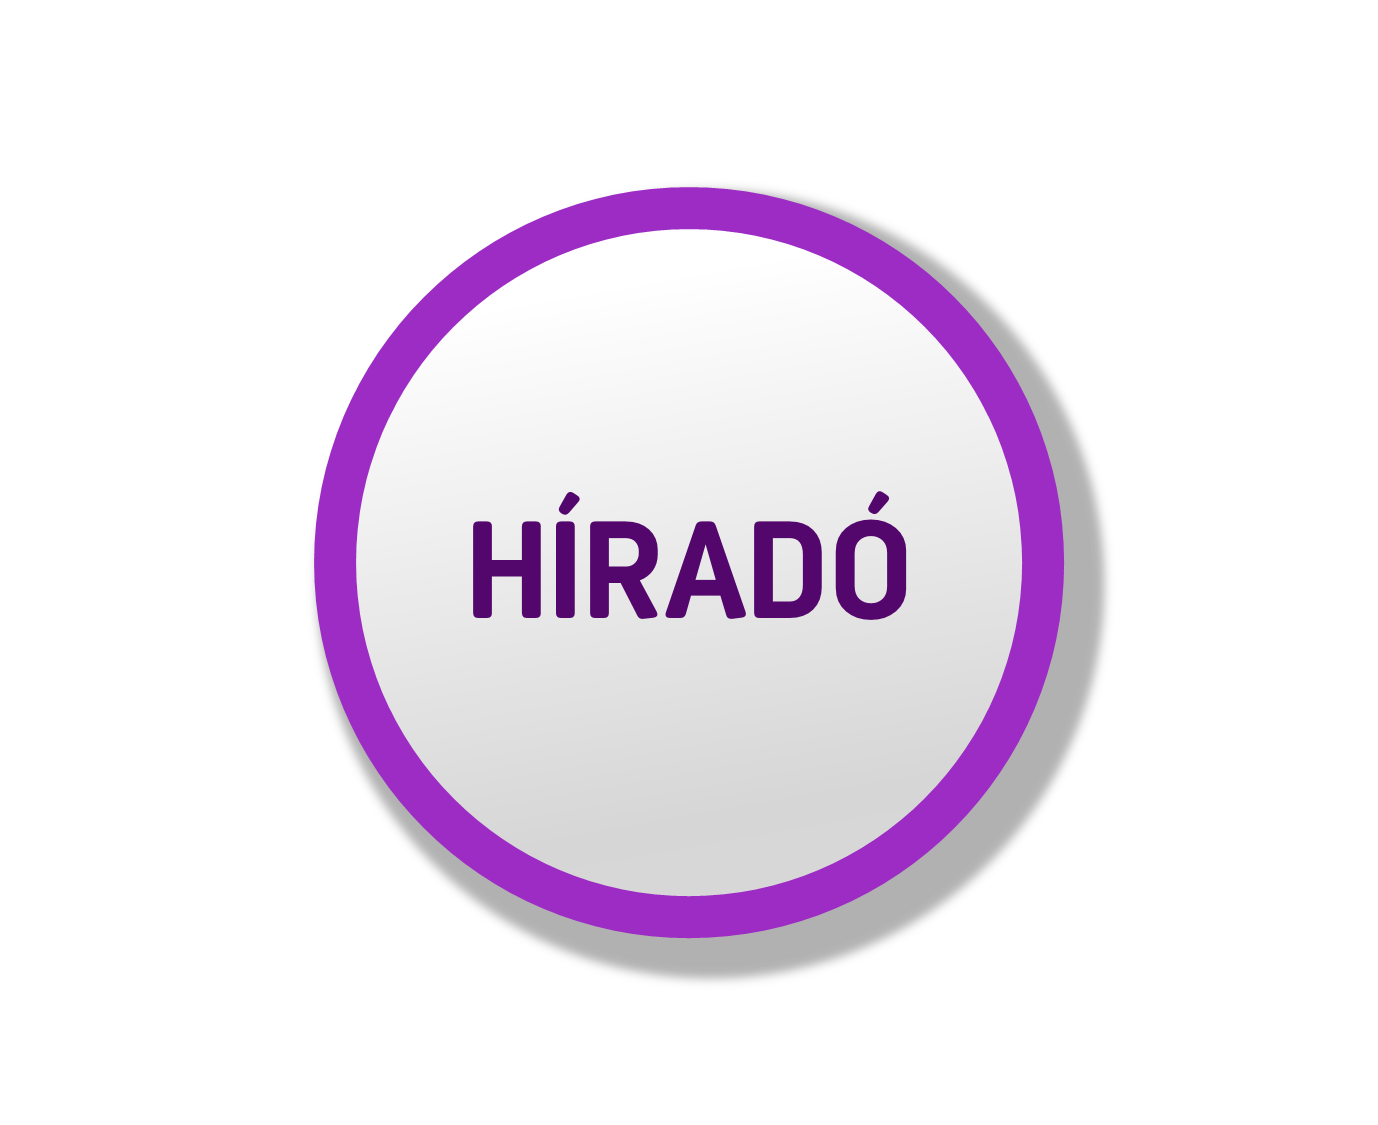 File:Híradó.png - Wikimedia Commons